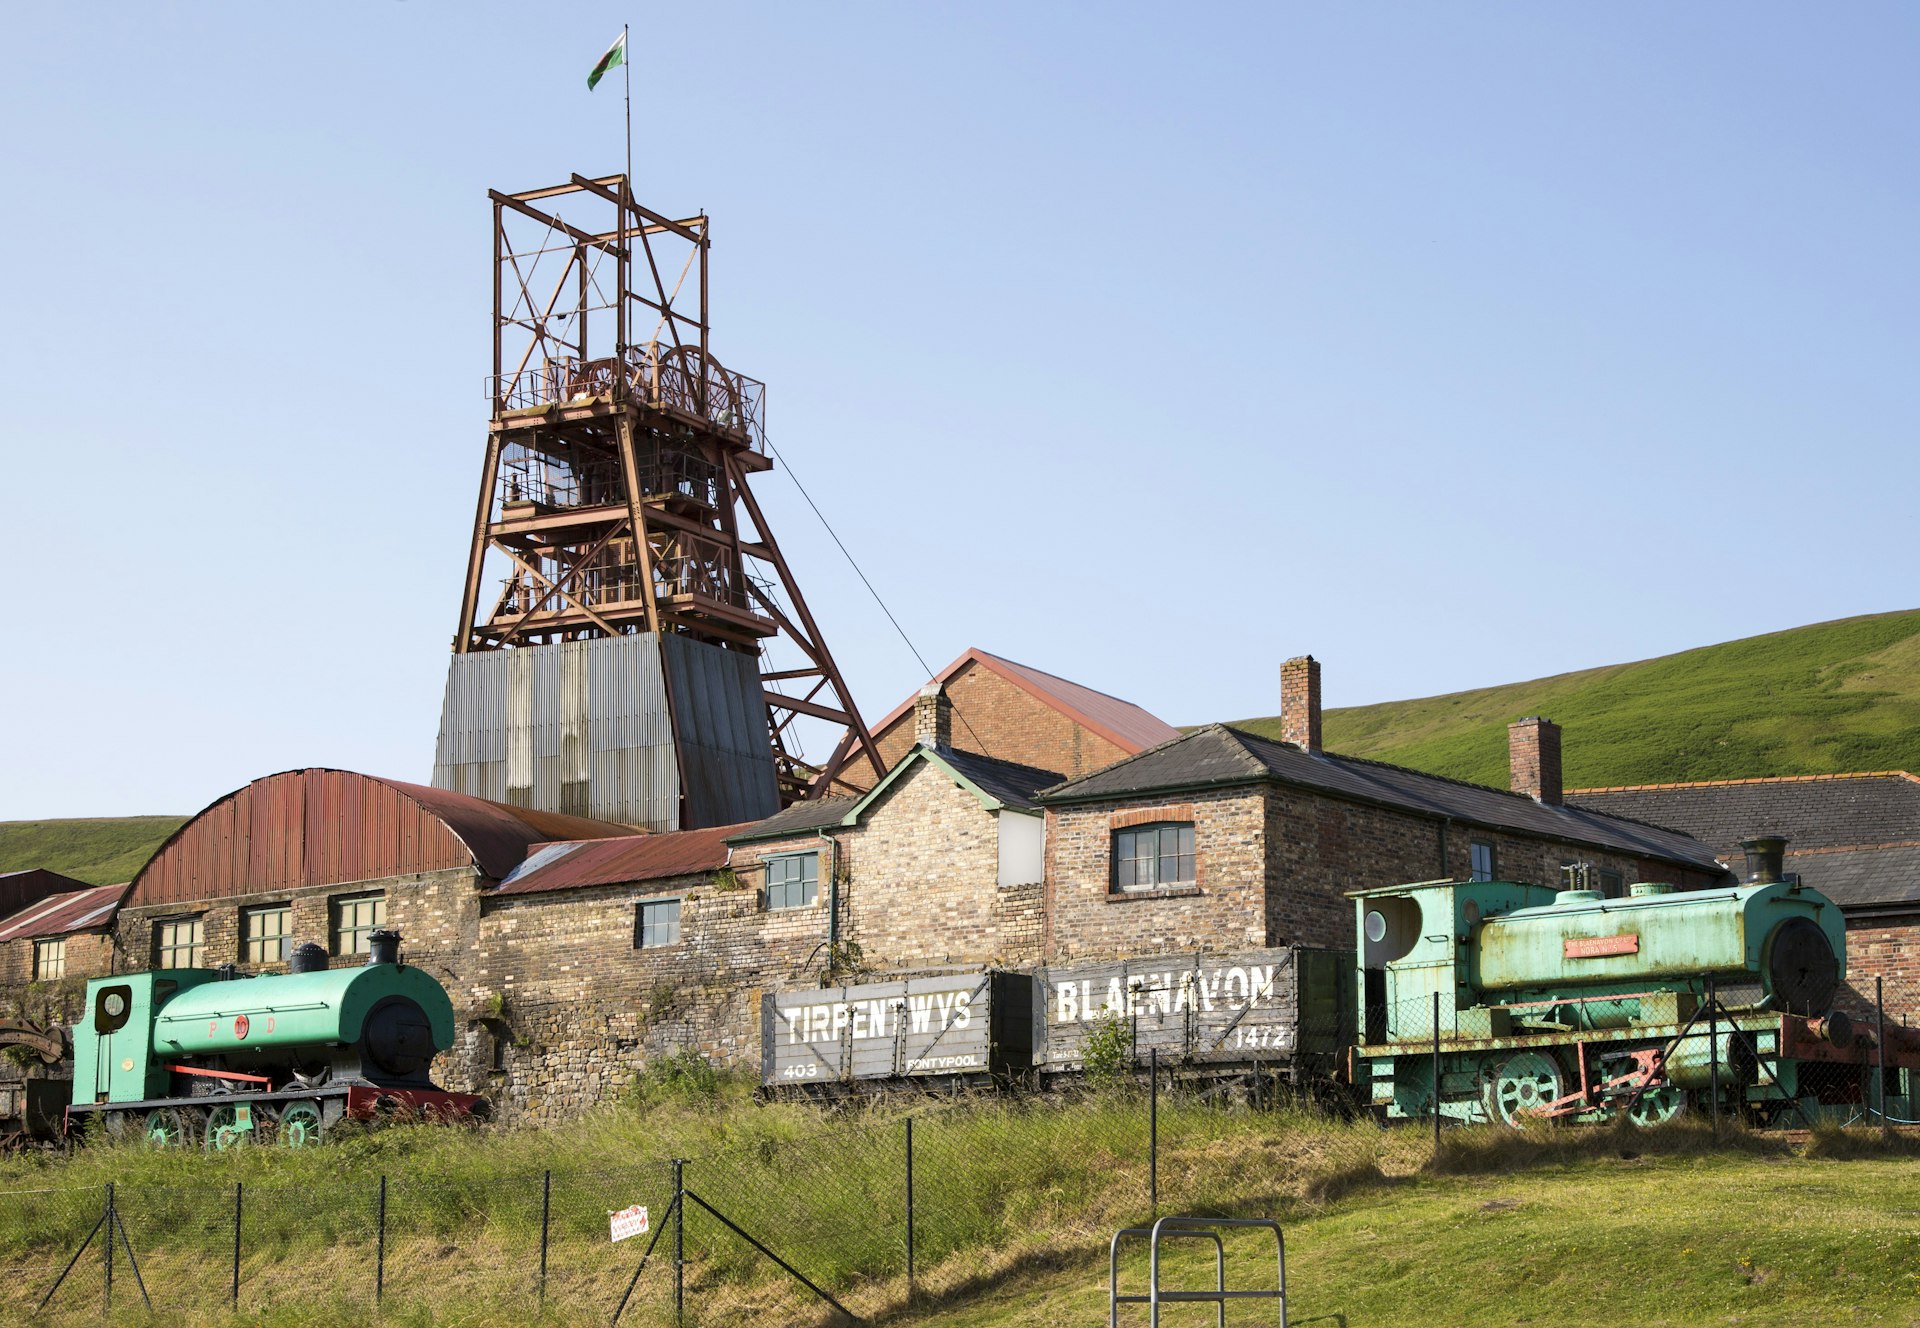 Big Pit National Coal Museum © Geography Photos / UIG via Getty Images